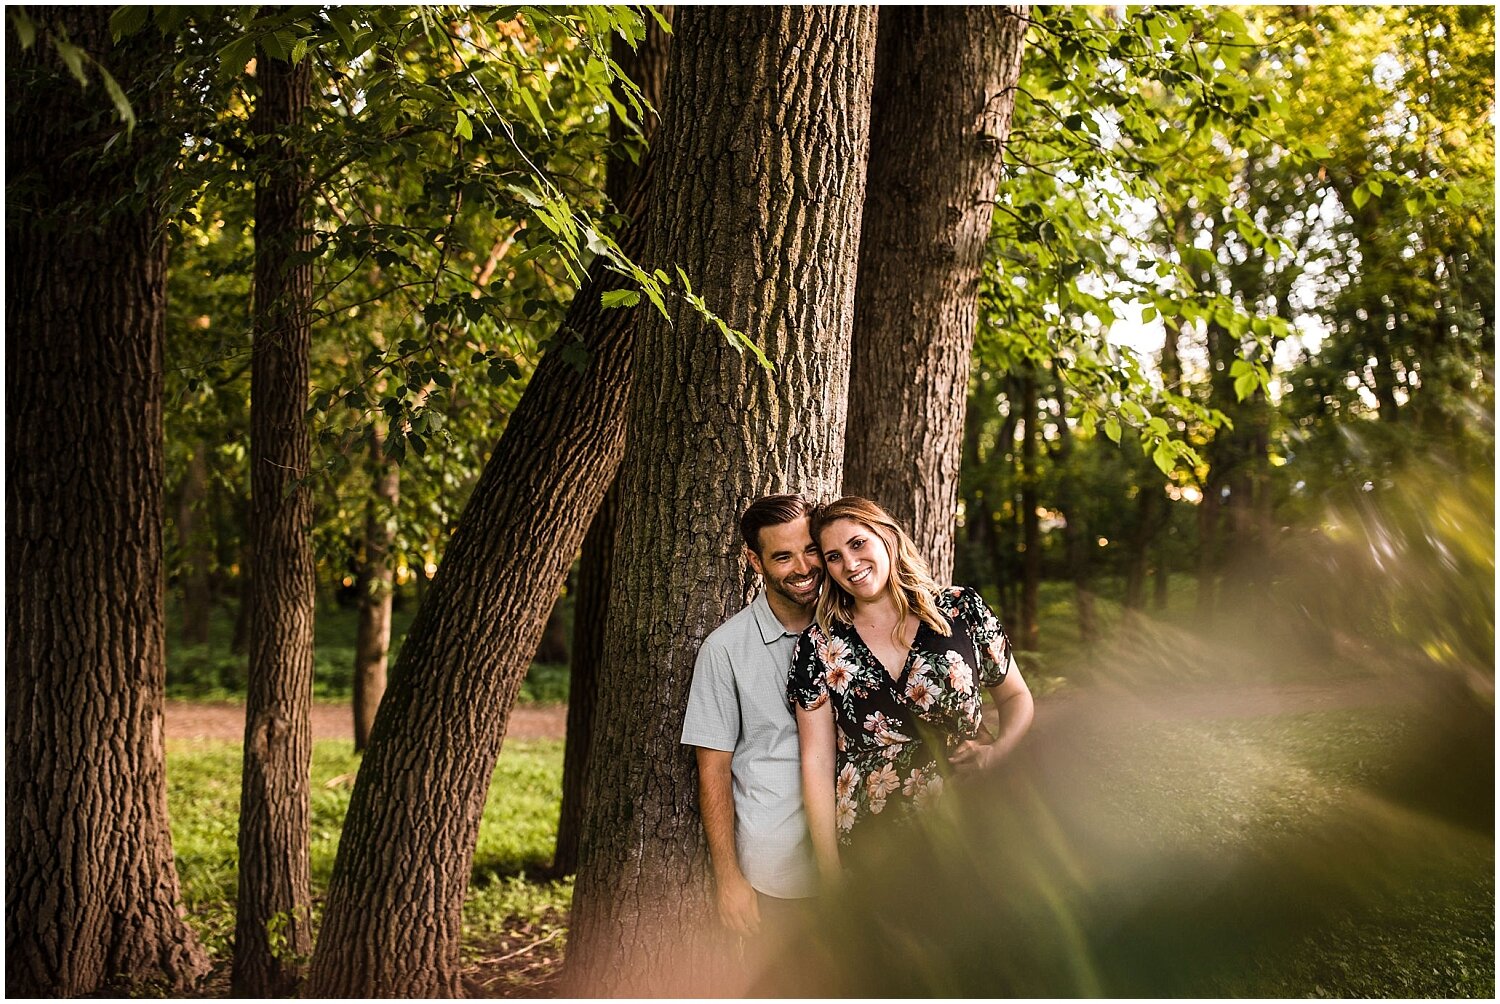  couple in the forest for their engagement session 